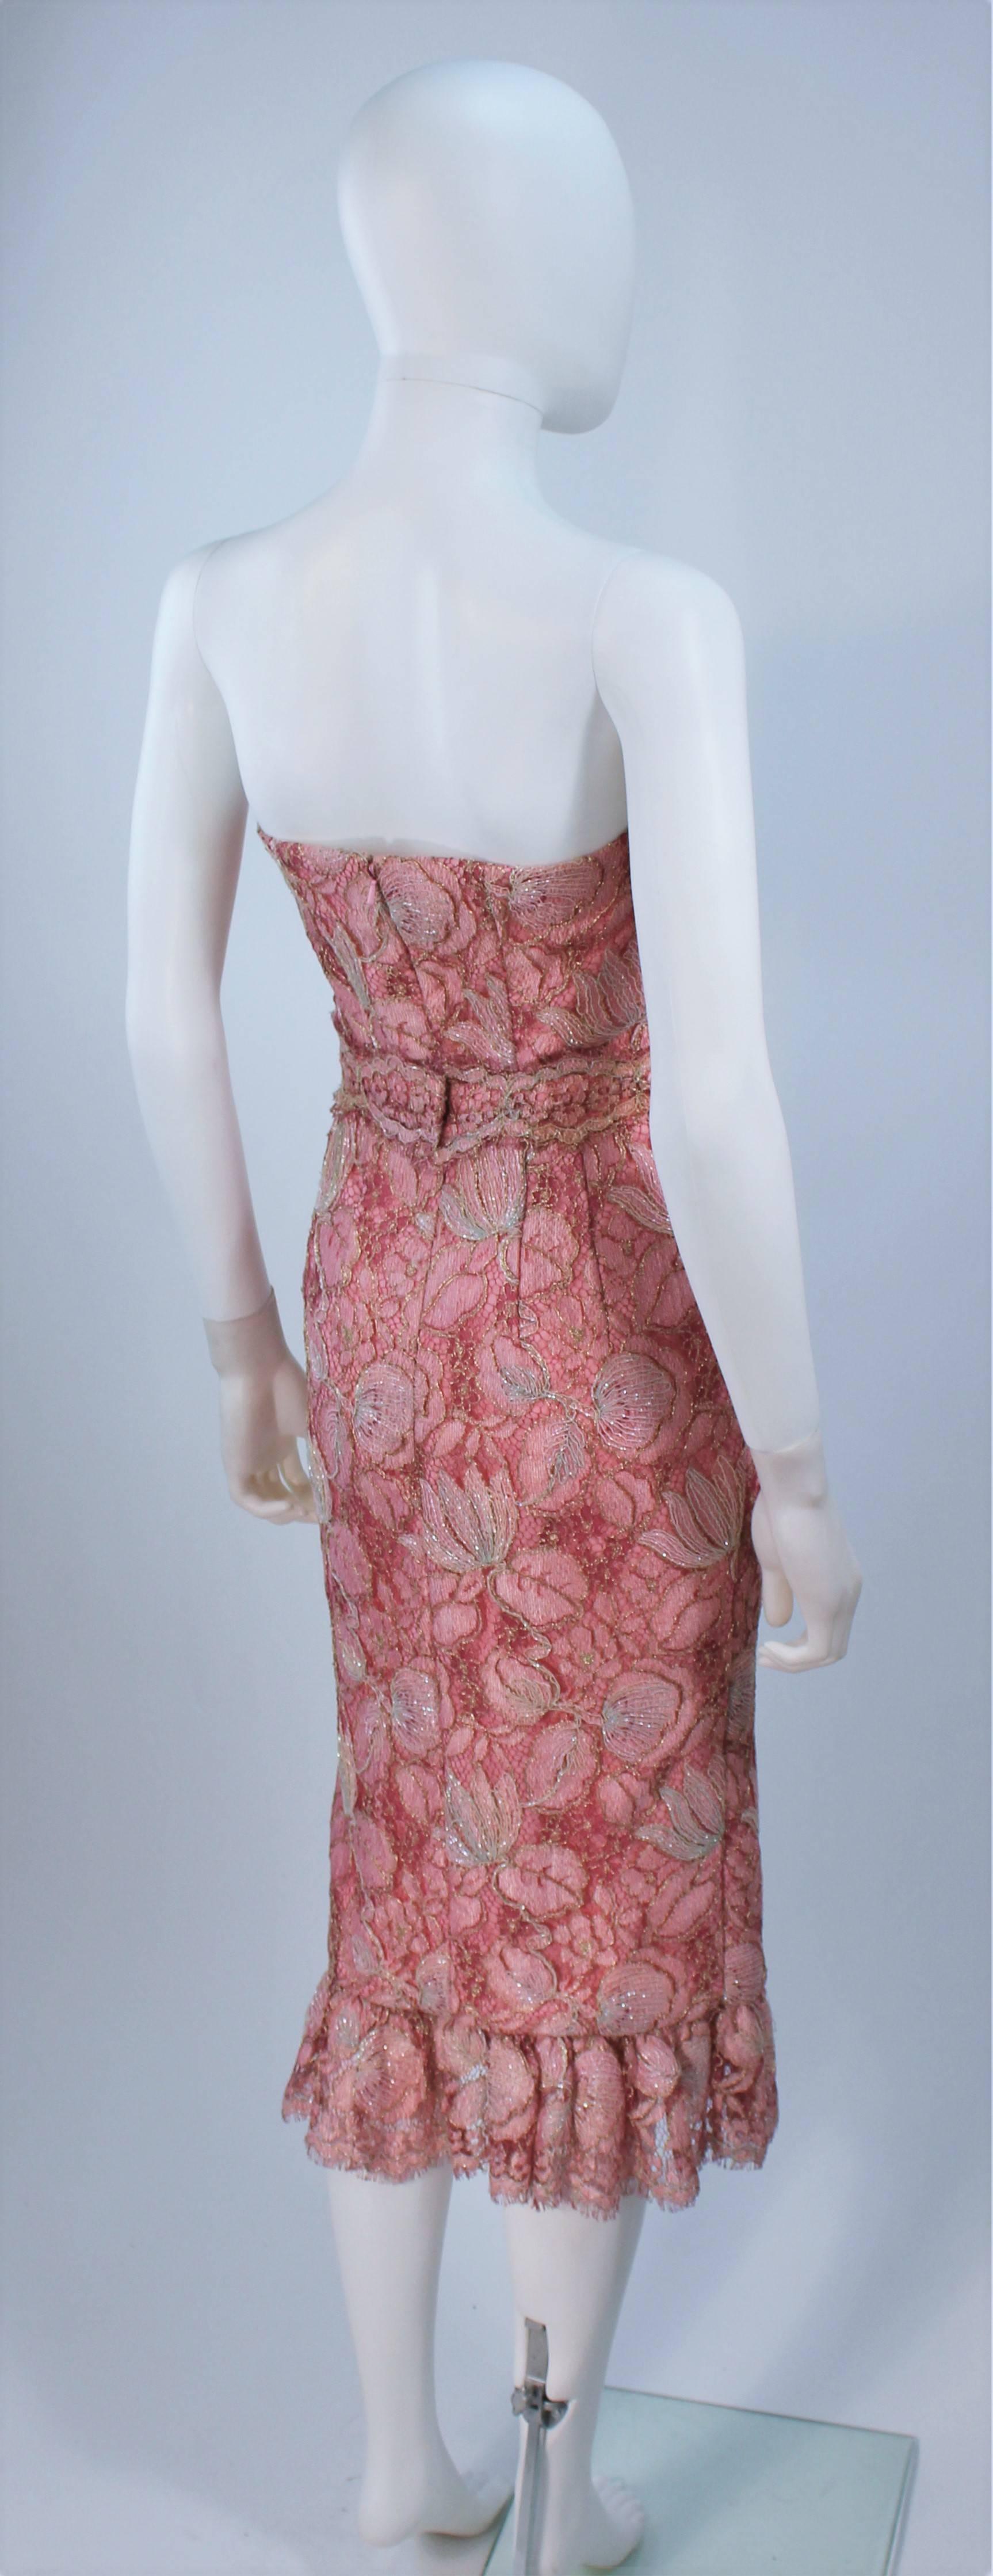 ELIZABETH MASON COUTURE Pink Metallic Lace Cocktail Dress Made to Order For Sale 3